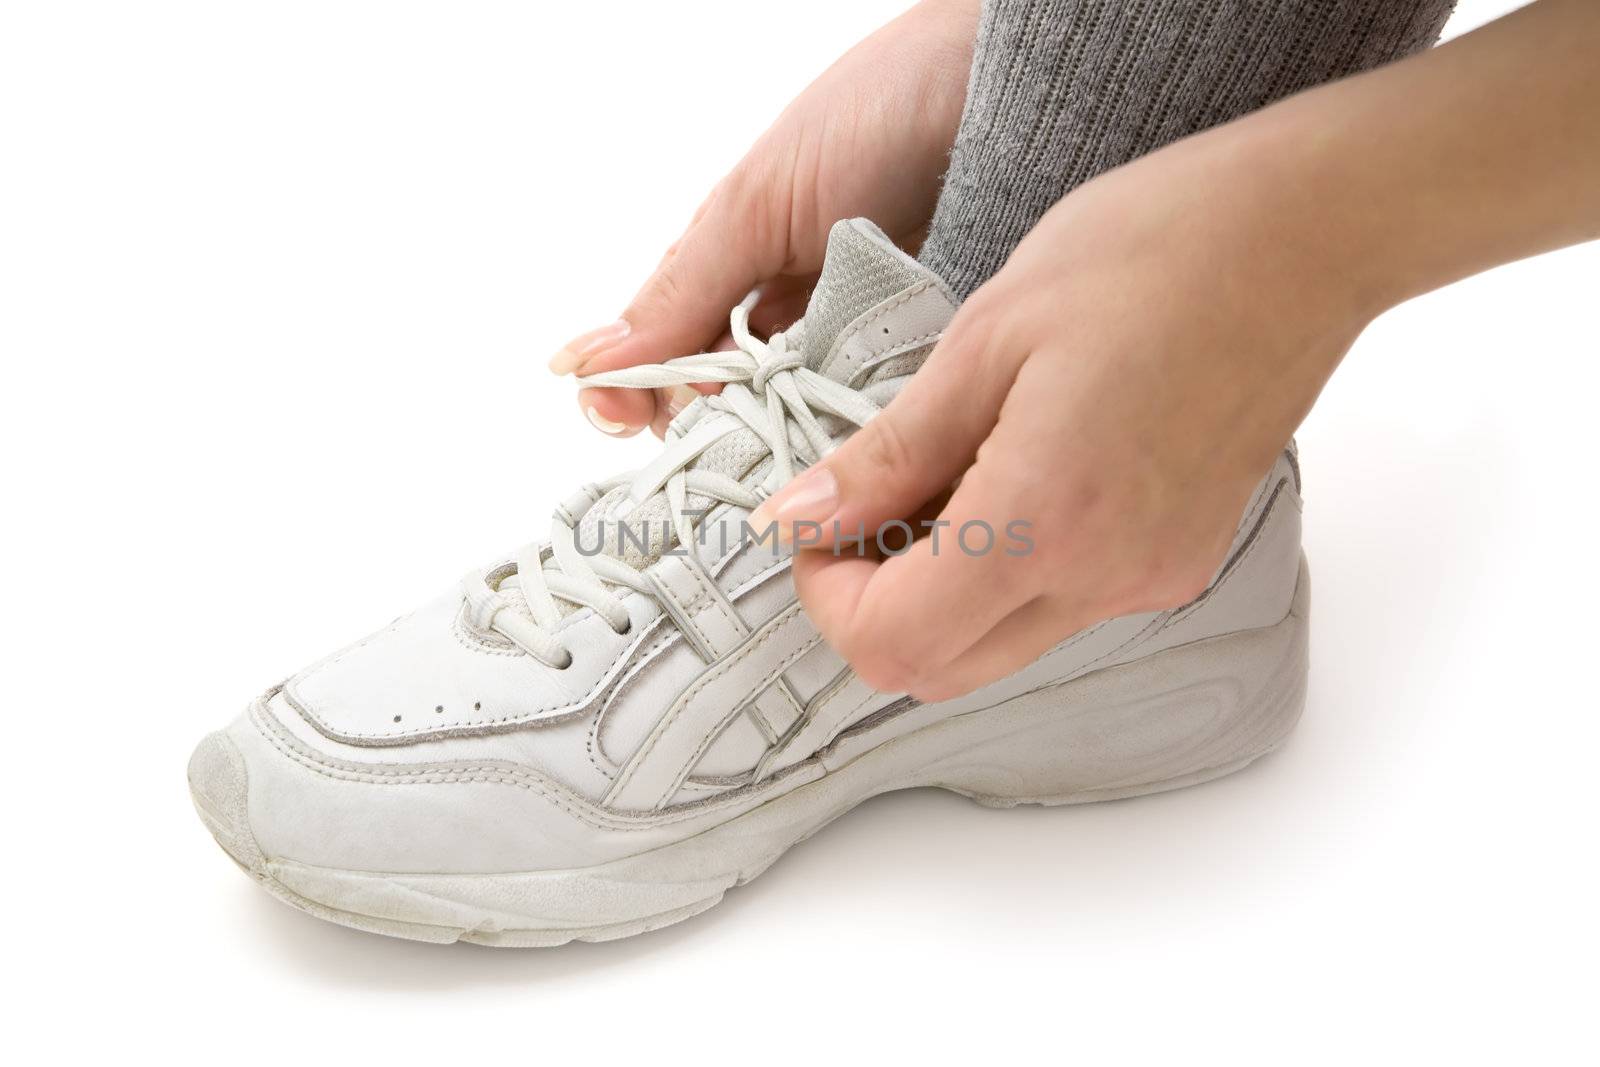 Woman tying her running shoes. White background.